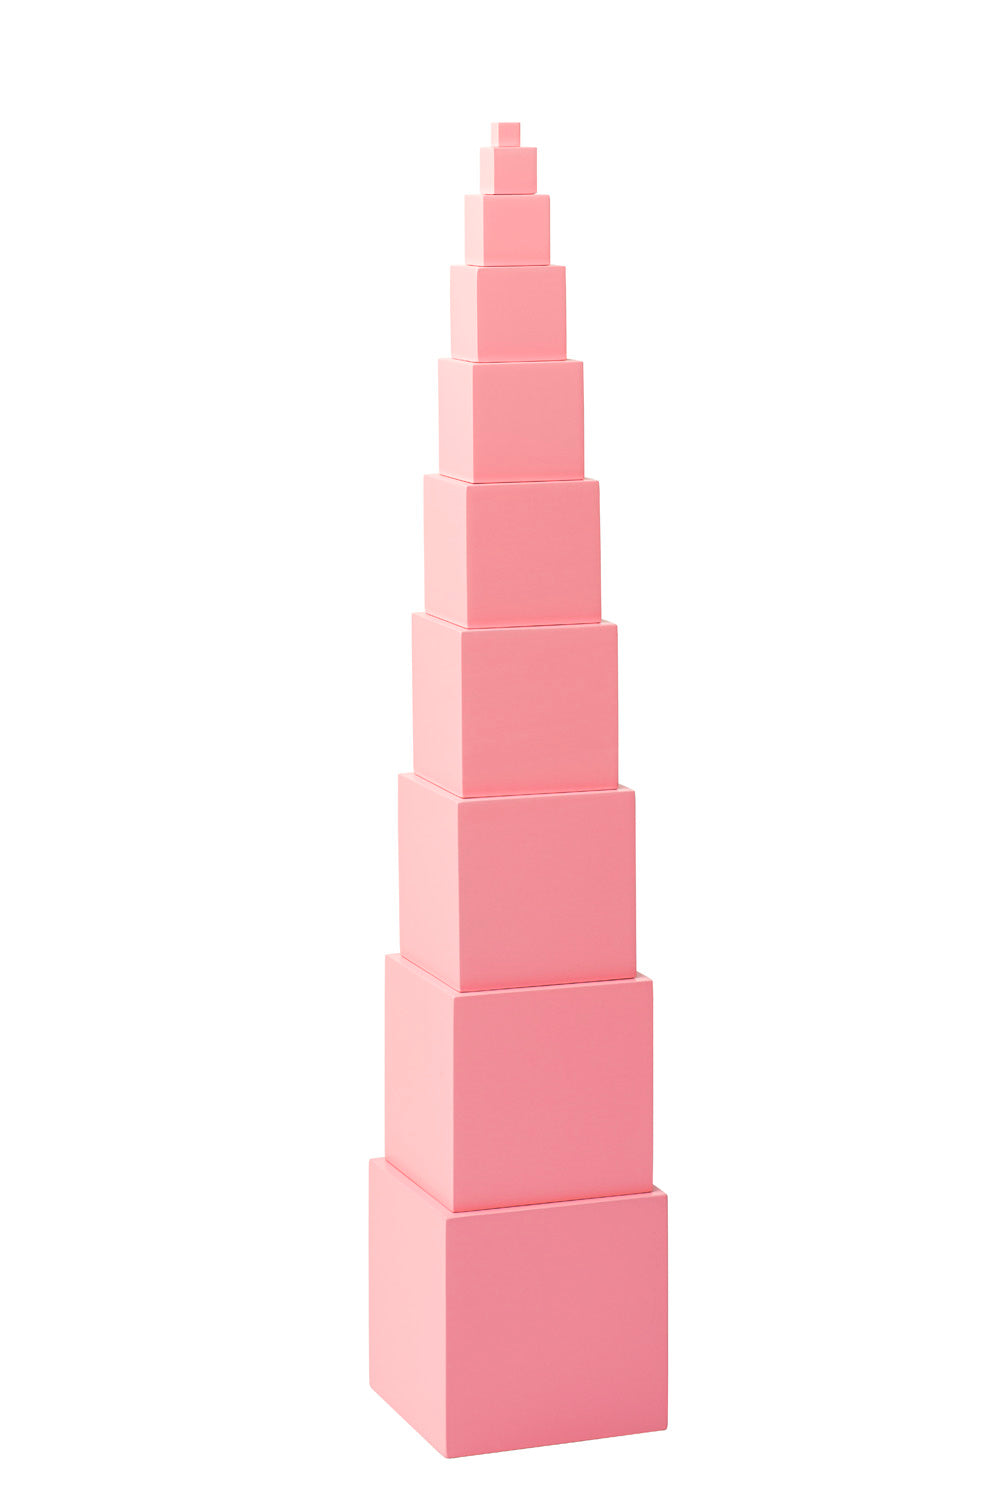 Replacement Pink Tower Smallest Cube 1 x 1 x 1 cm (NL)